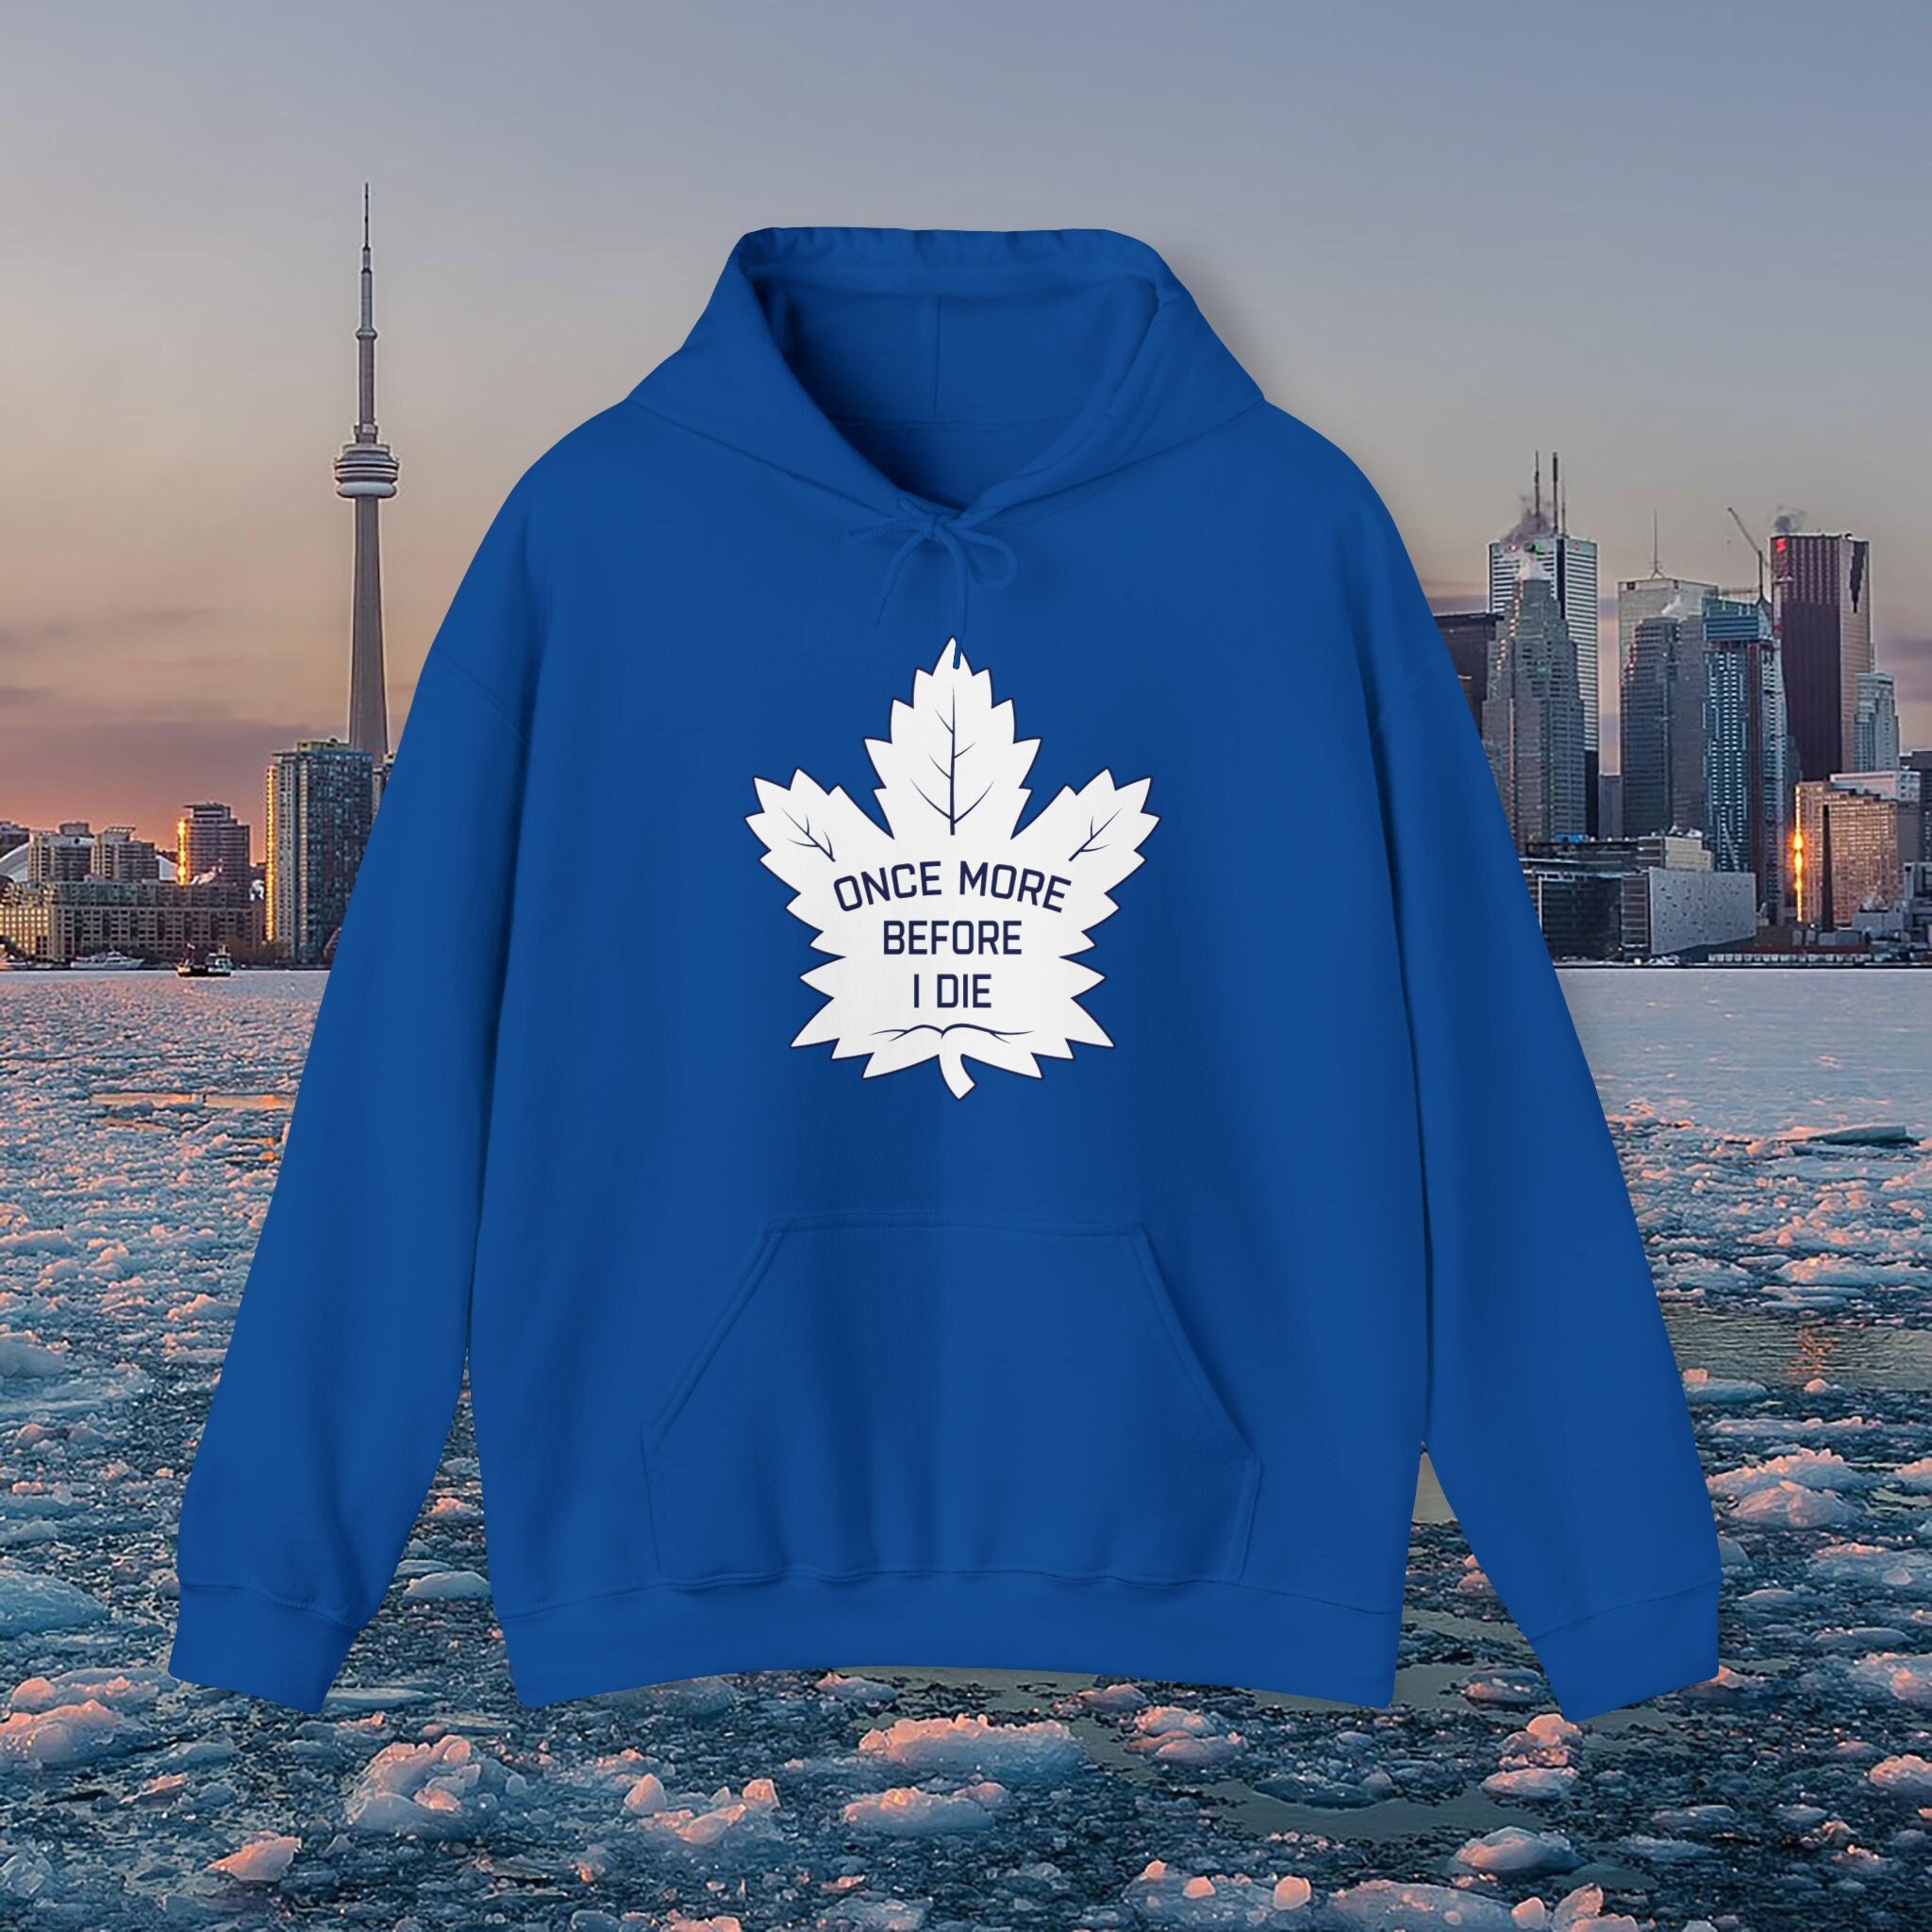 Vintage Toronto Maple Leafs Hoodie size XL (26x31) for $40